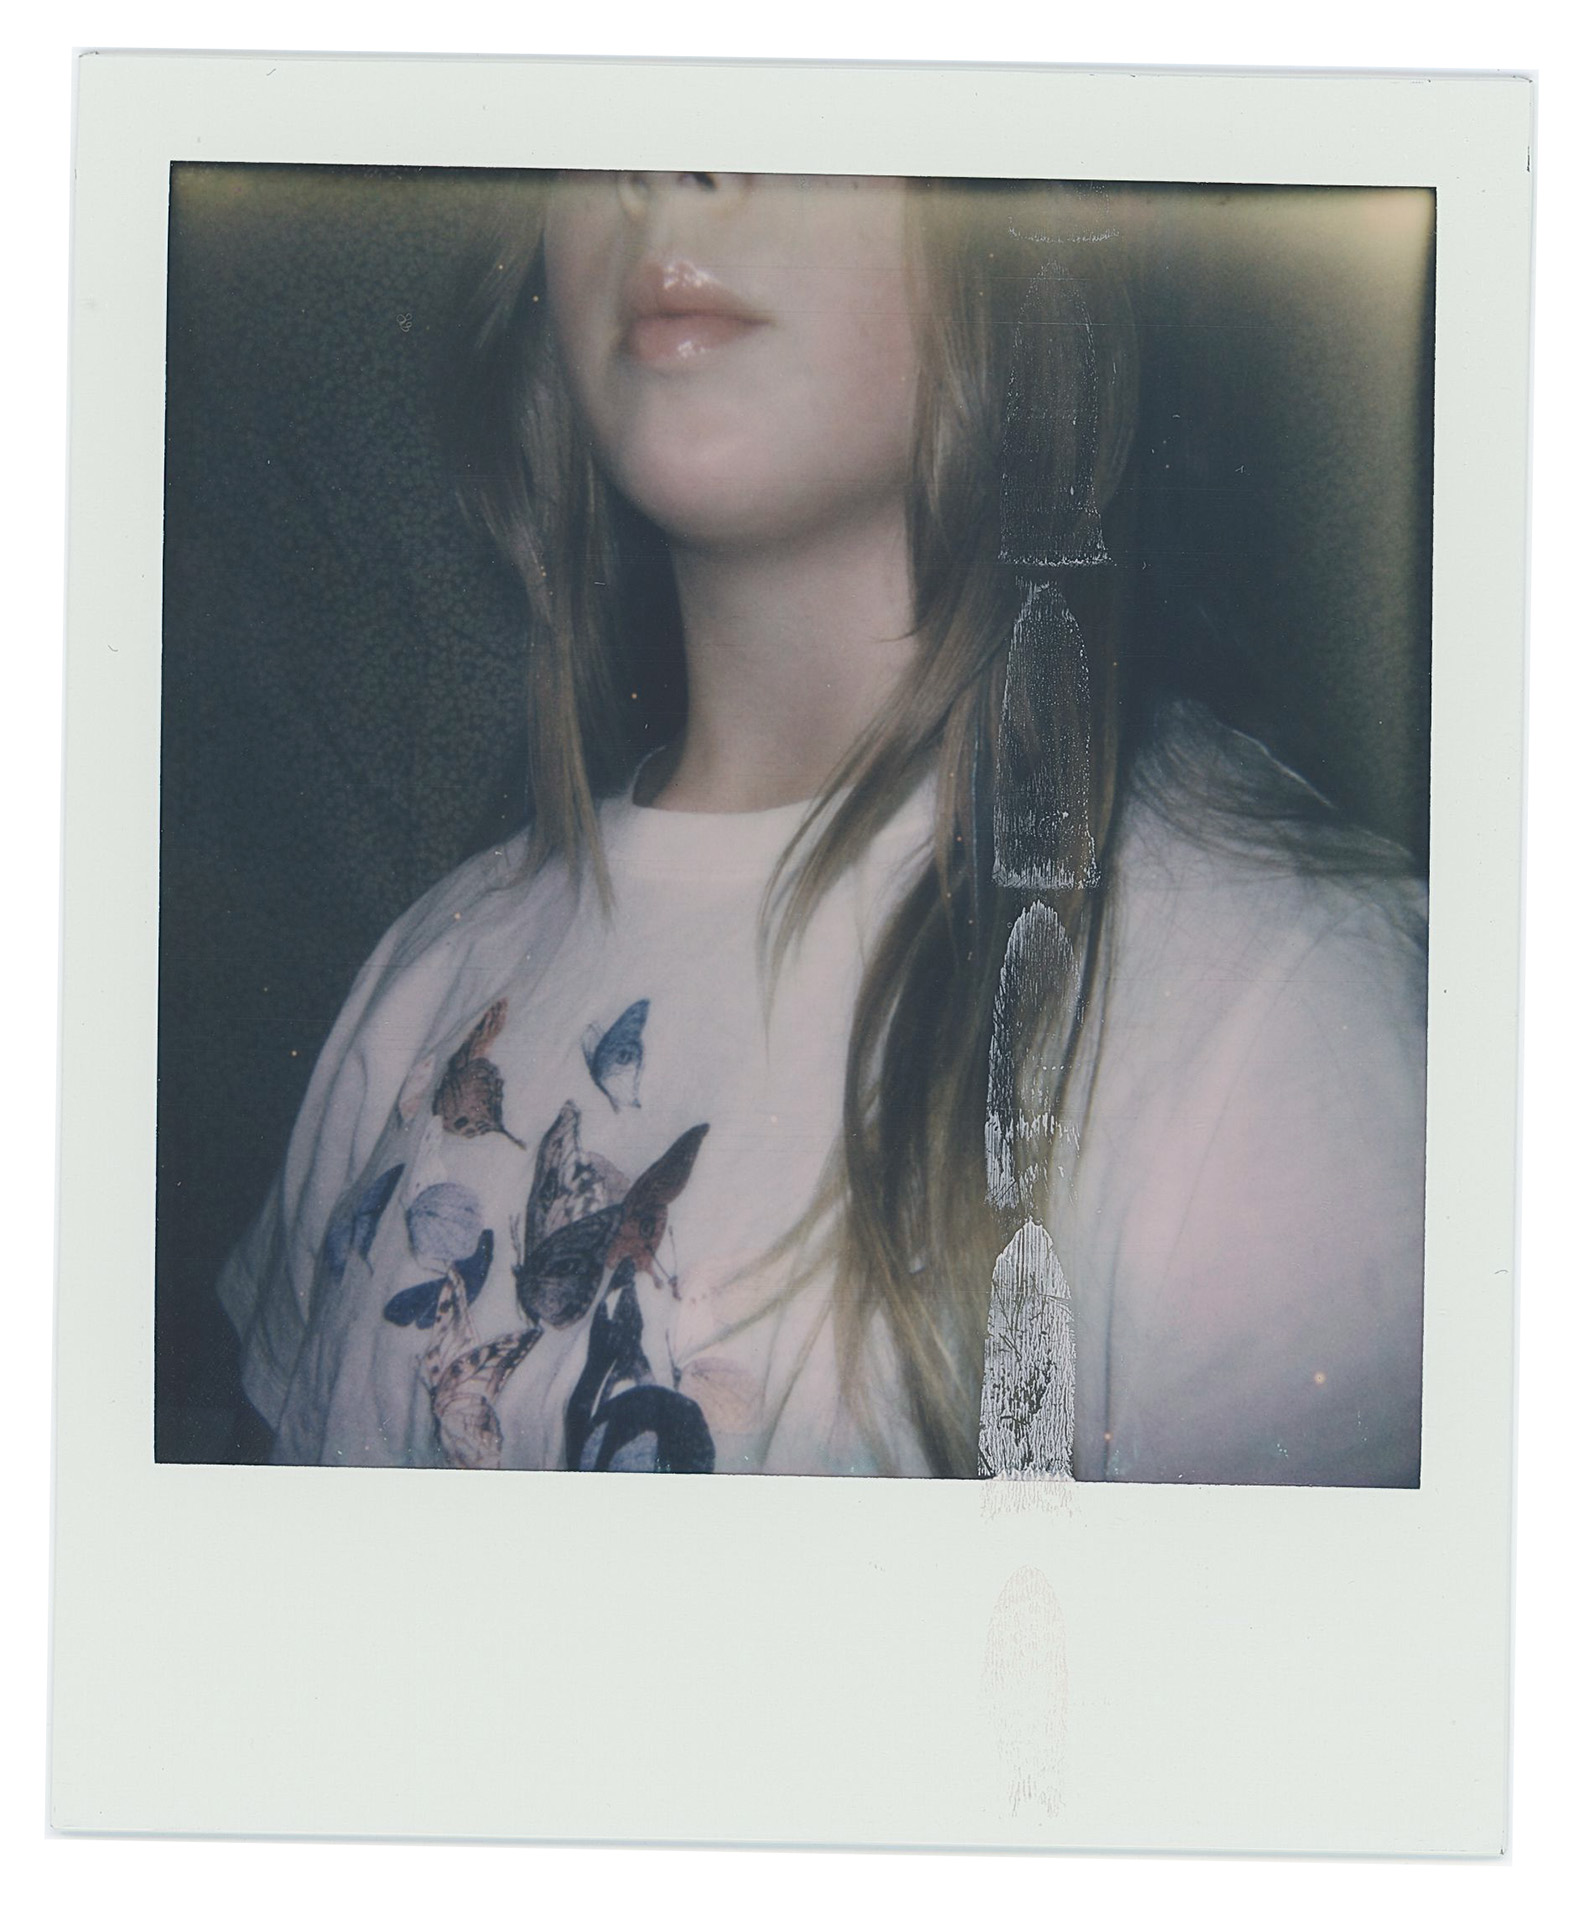 A Polaroid of Eden, from her nose to her chest. She is wearing a white t-shirt with butterflies on it.